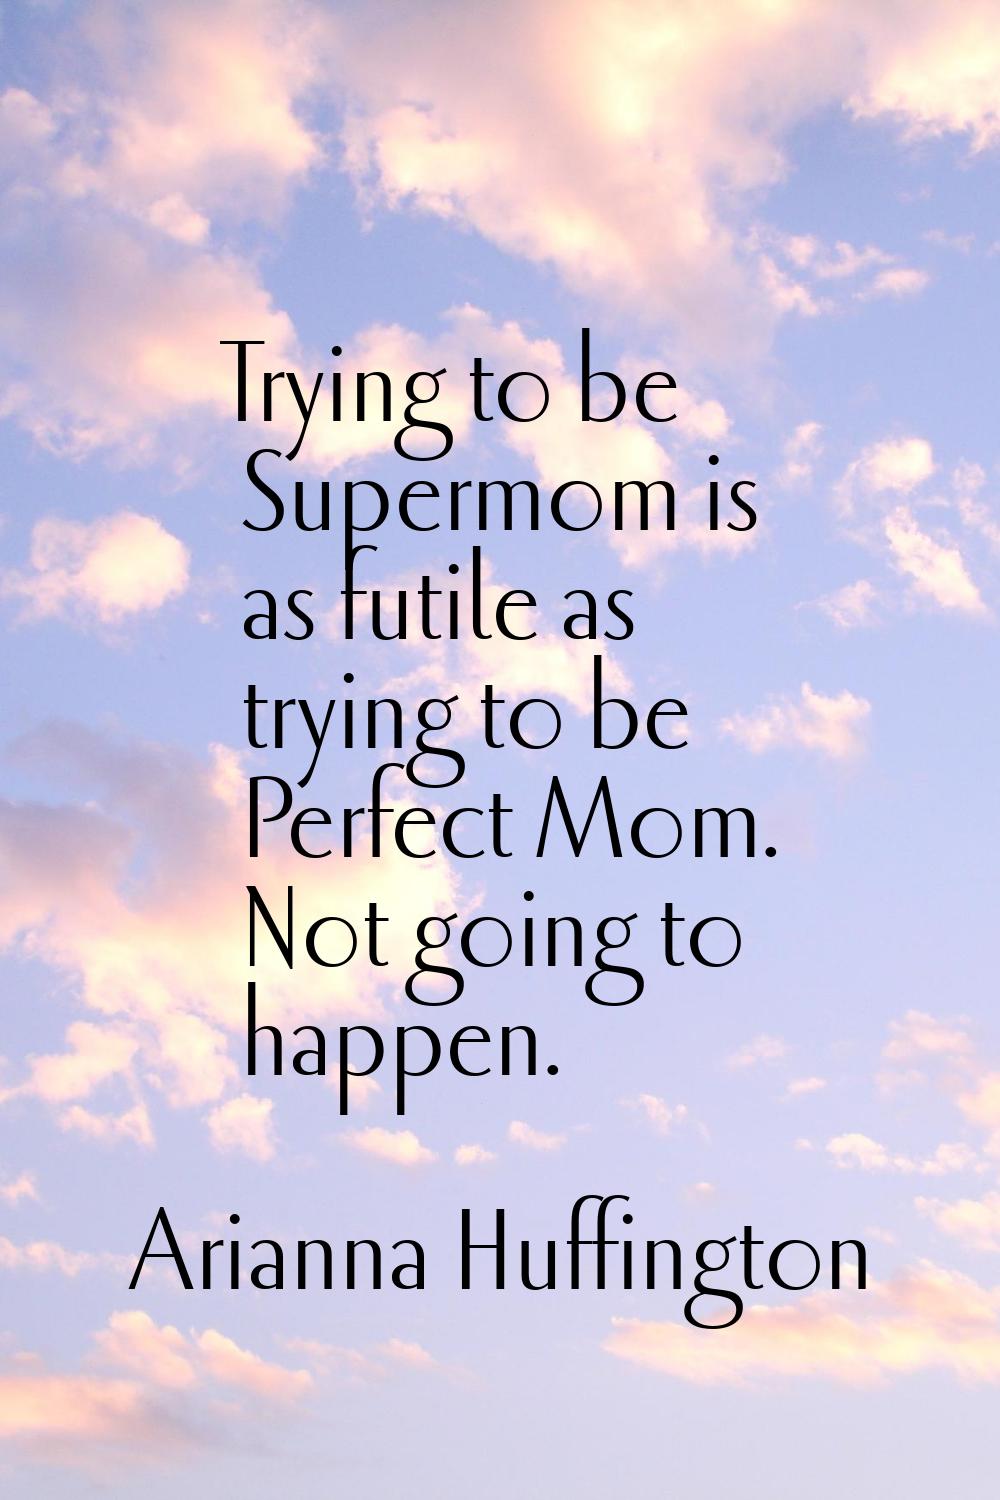 Trying to be Supermom is as futile as trying to be Perfect Mom. Not going to happen.